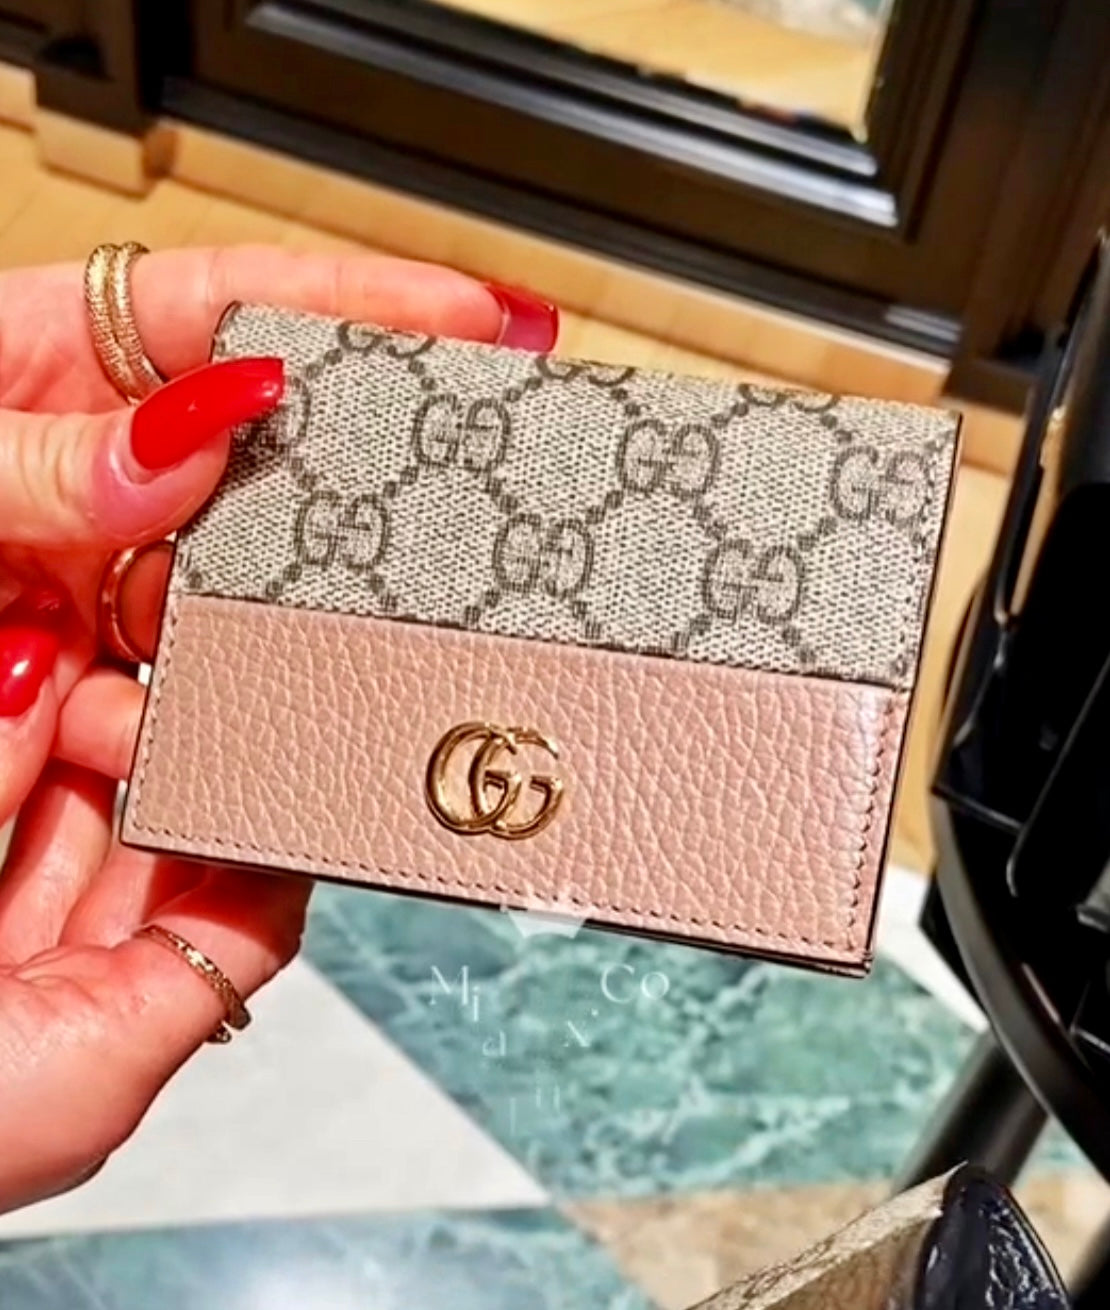 Gucci▪️GG Marmont Card Case Wallet 老花卡包雙開短夾/320 🉐13800